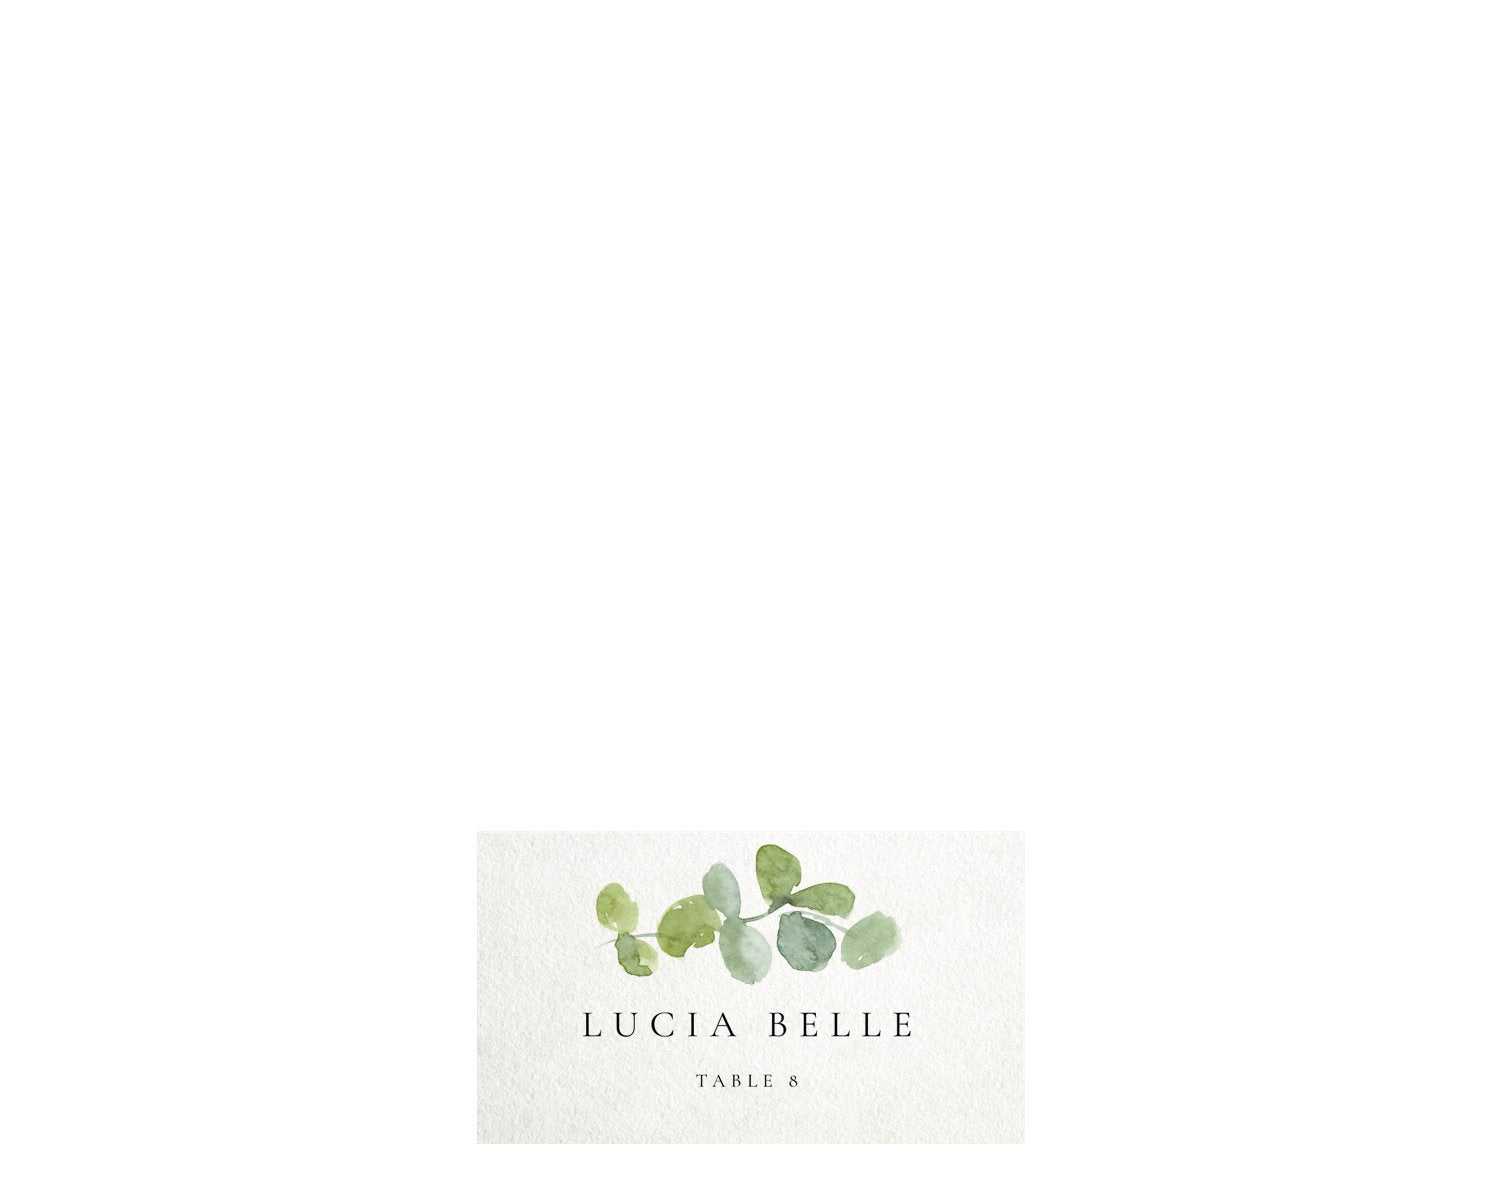 Wedding Place Card Template, Table Name Cards, Escort Card, Name Card,  Greenery Place Cards, Name Cards, Wedding Dinner, Watercolor Leaves Pertaining To Table Name Card Template